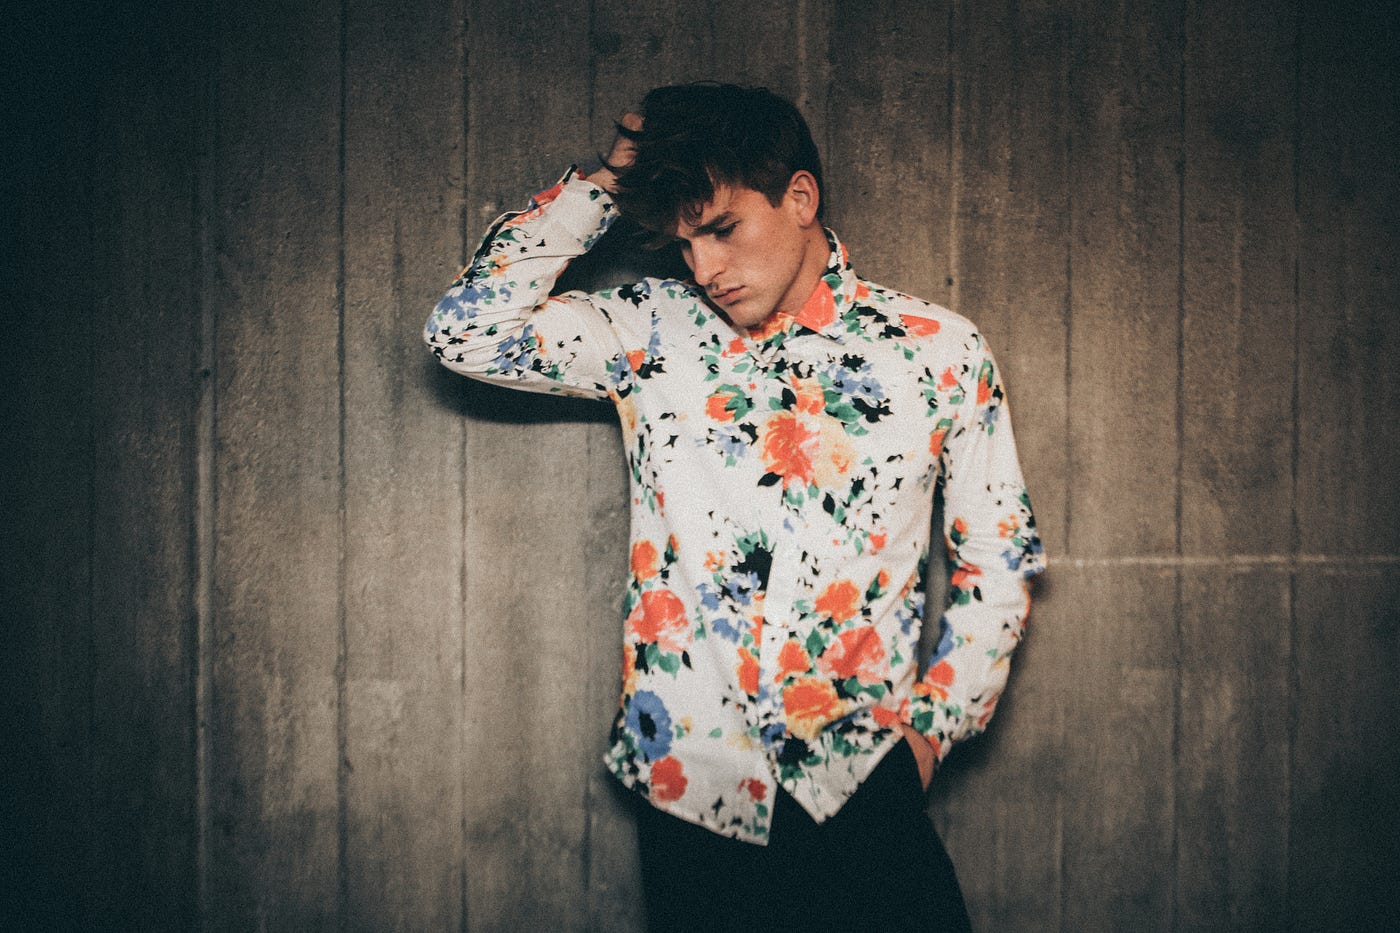 A white guy wearing a slightly gay-looking floral shirt, which I assume makes him a hero to everyone looking at this picture.